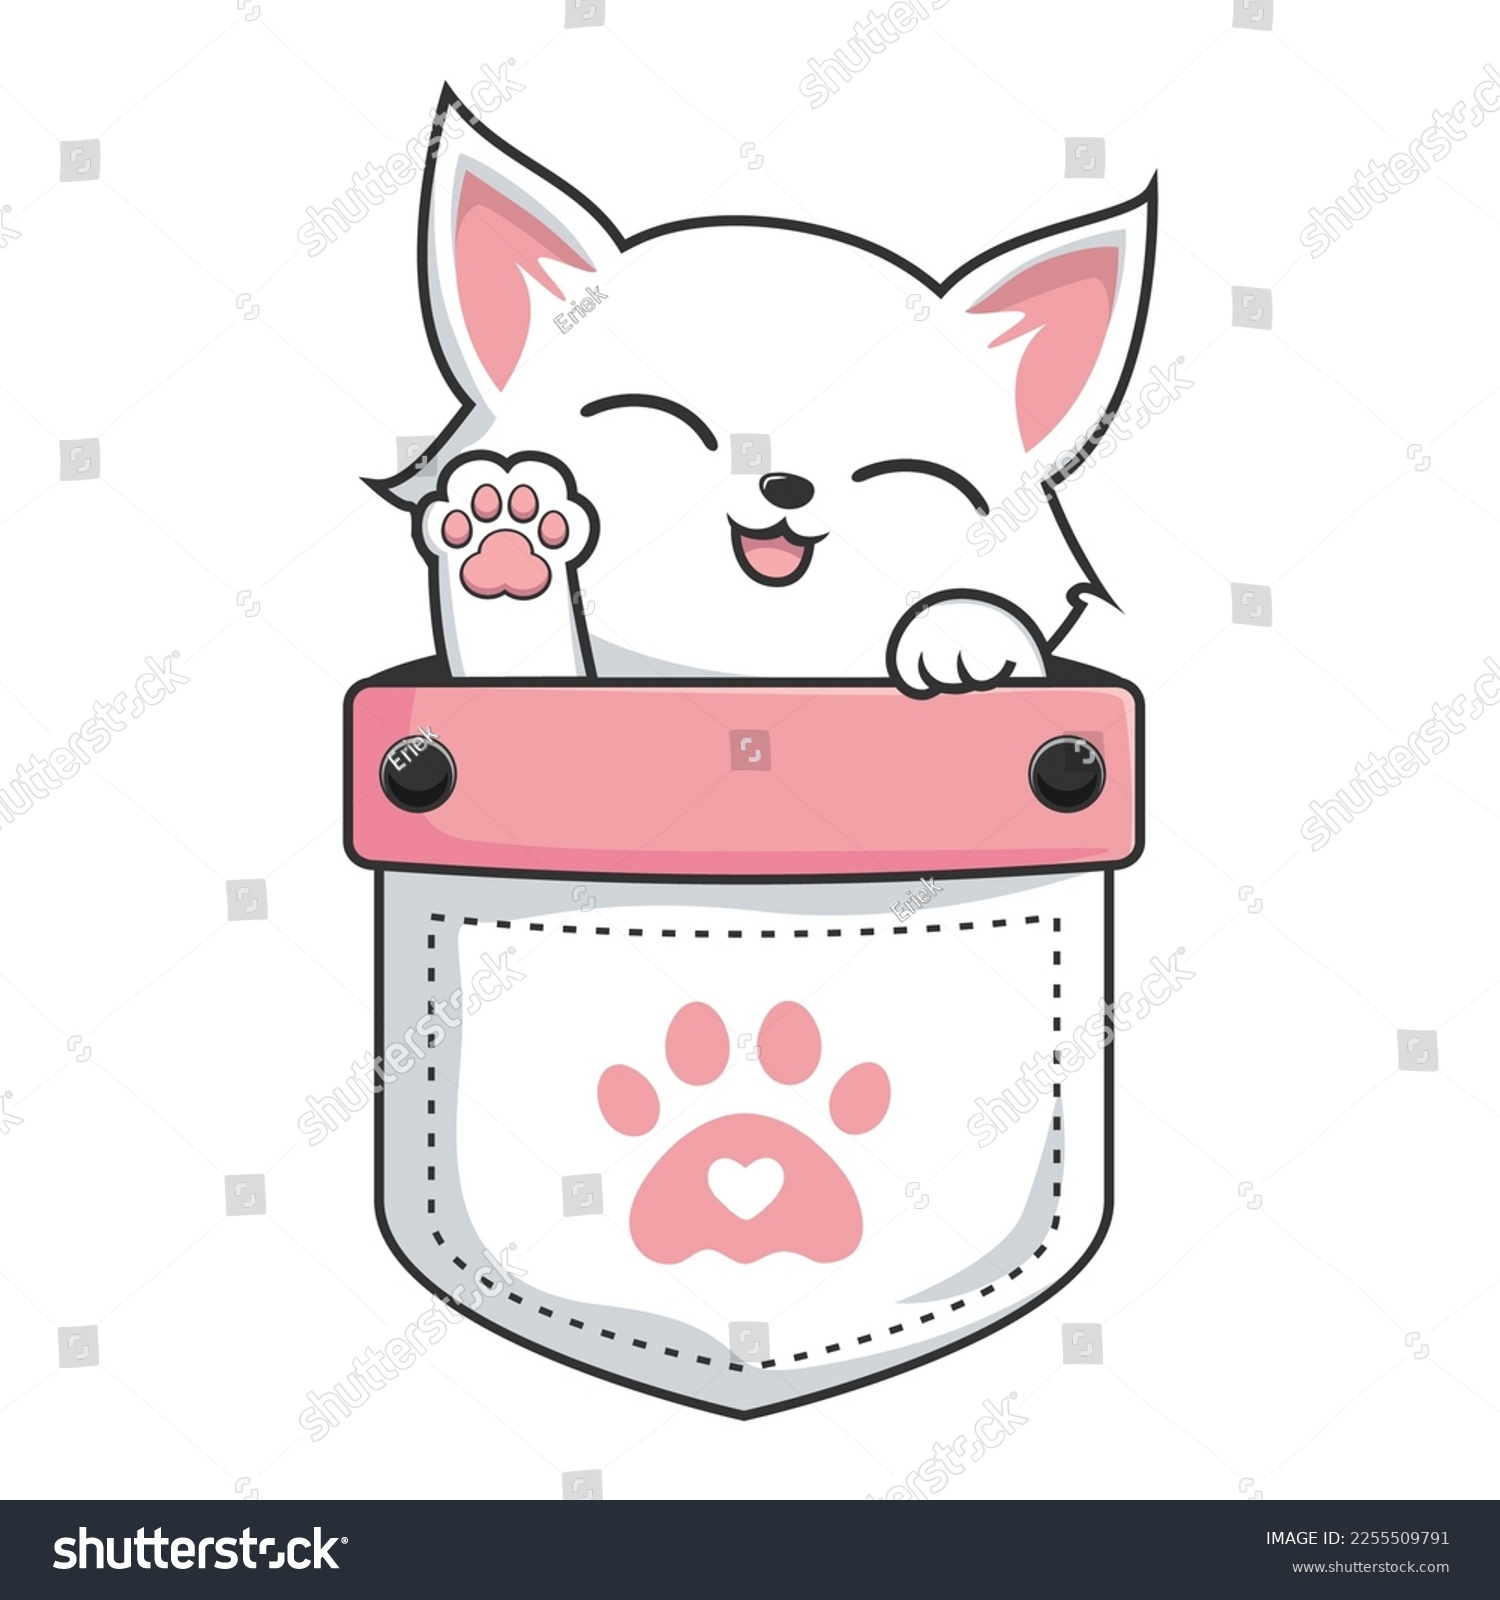 SVG of White Cat in Pocket - Cute White Pussy Cat in Pouch - waving paws-3 svg